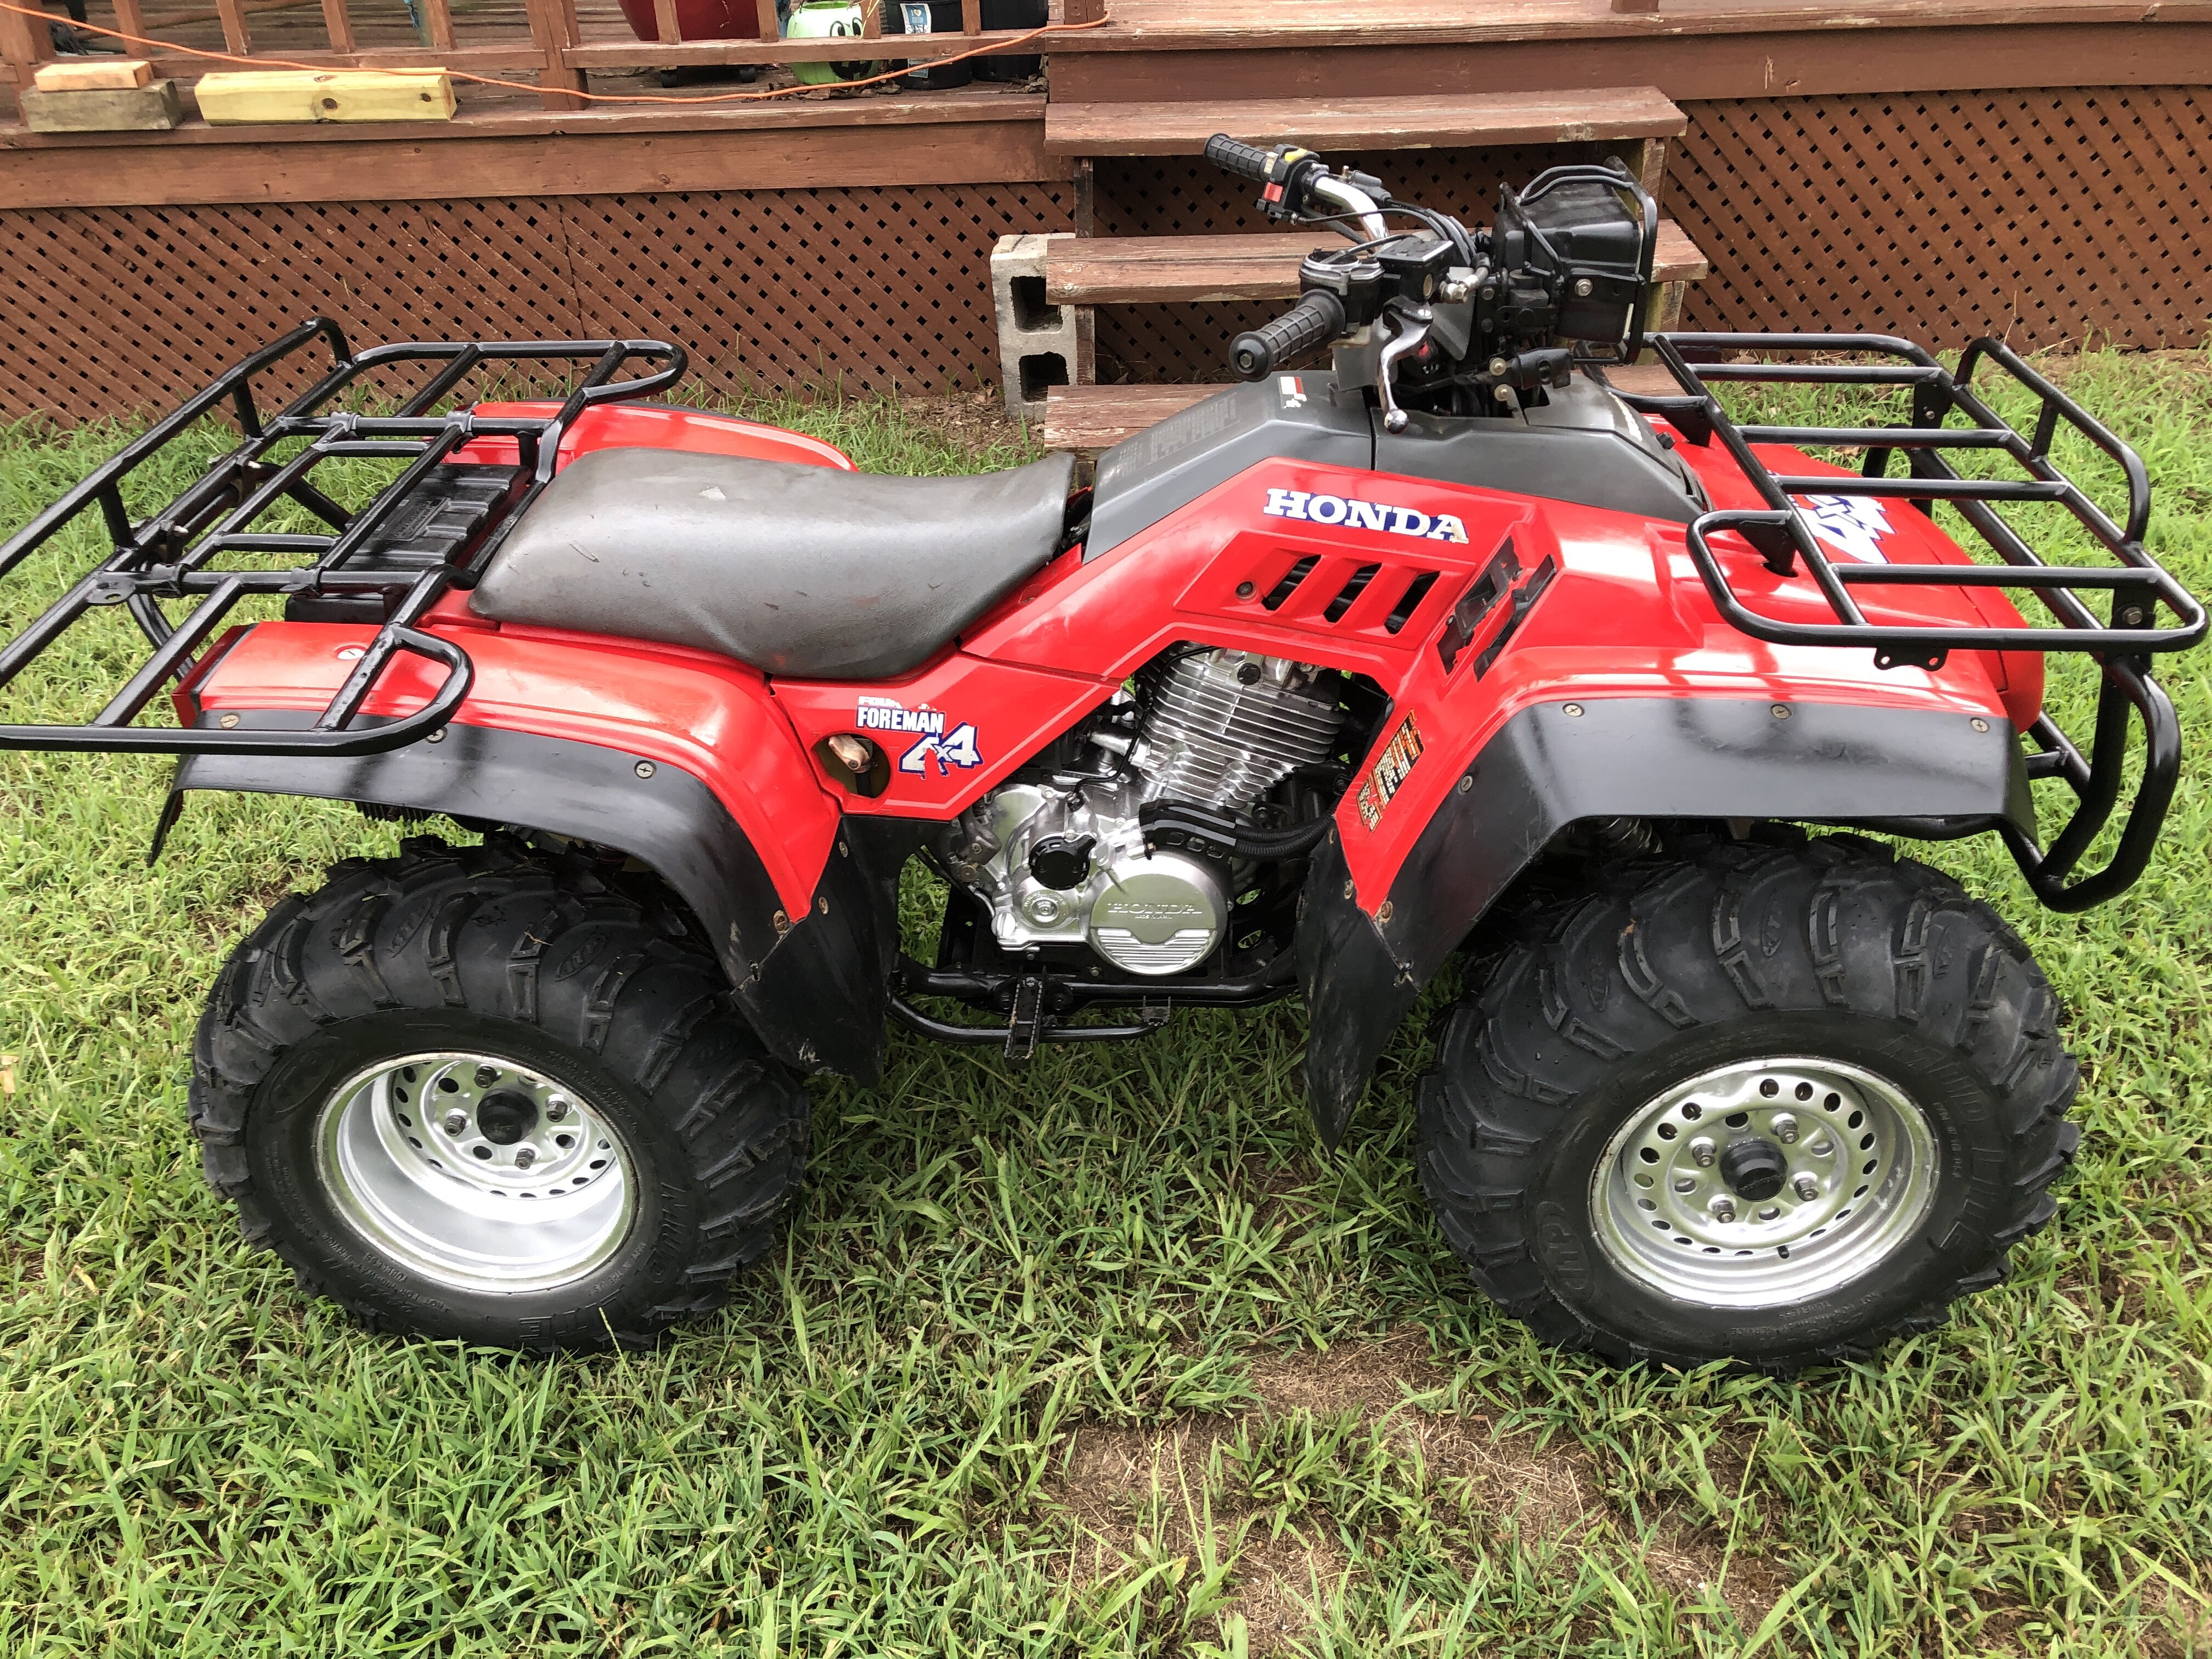 1987 trx350D foreman 4x4 - For Sale - Trade - Wanted - ATV Honda